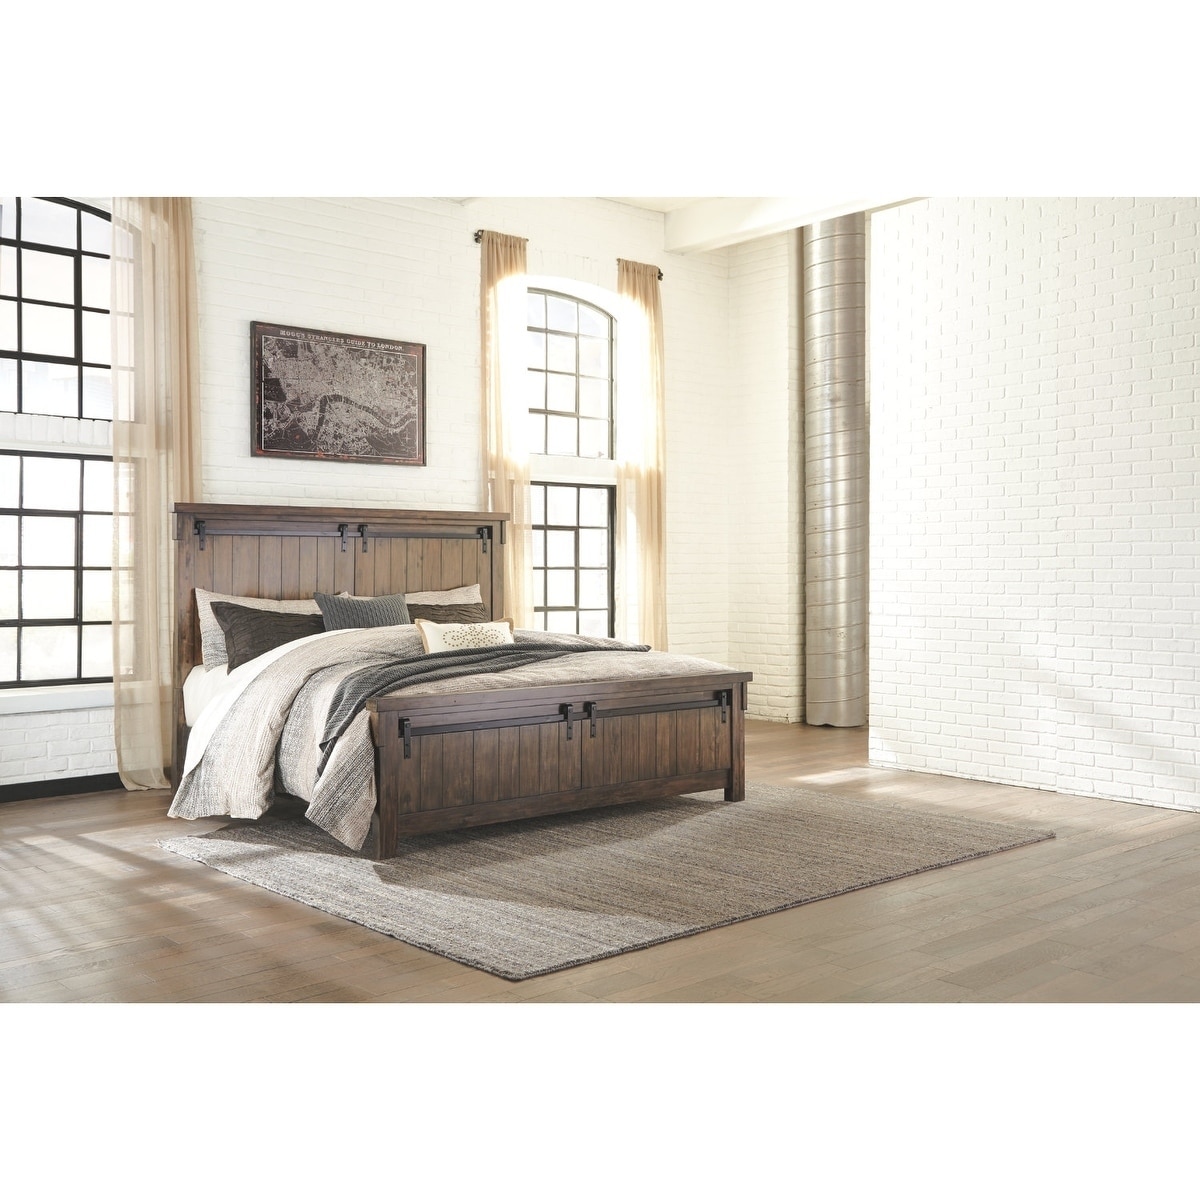 Signature Design By Ashley Jacinto Rustic Panel Bed